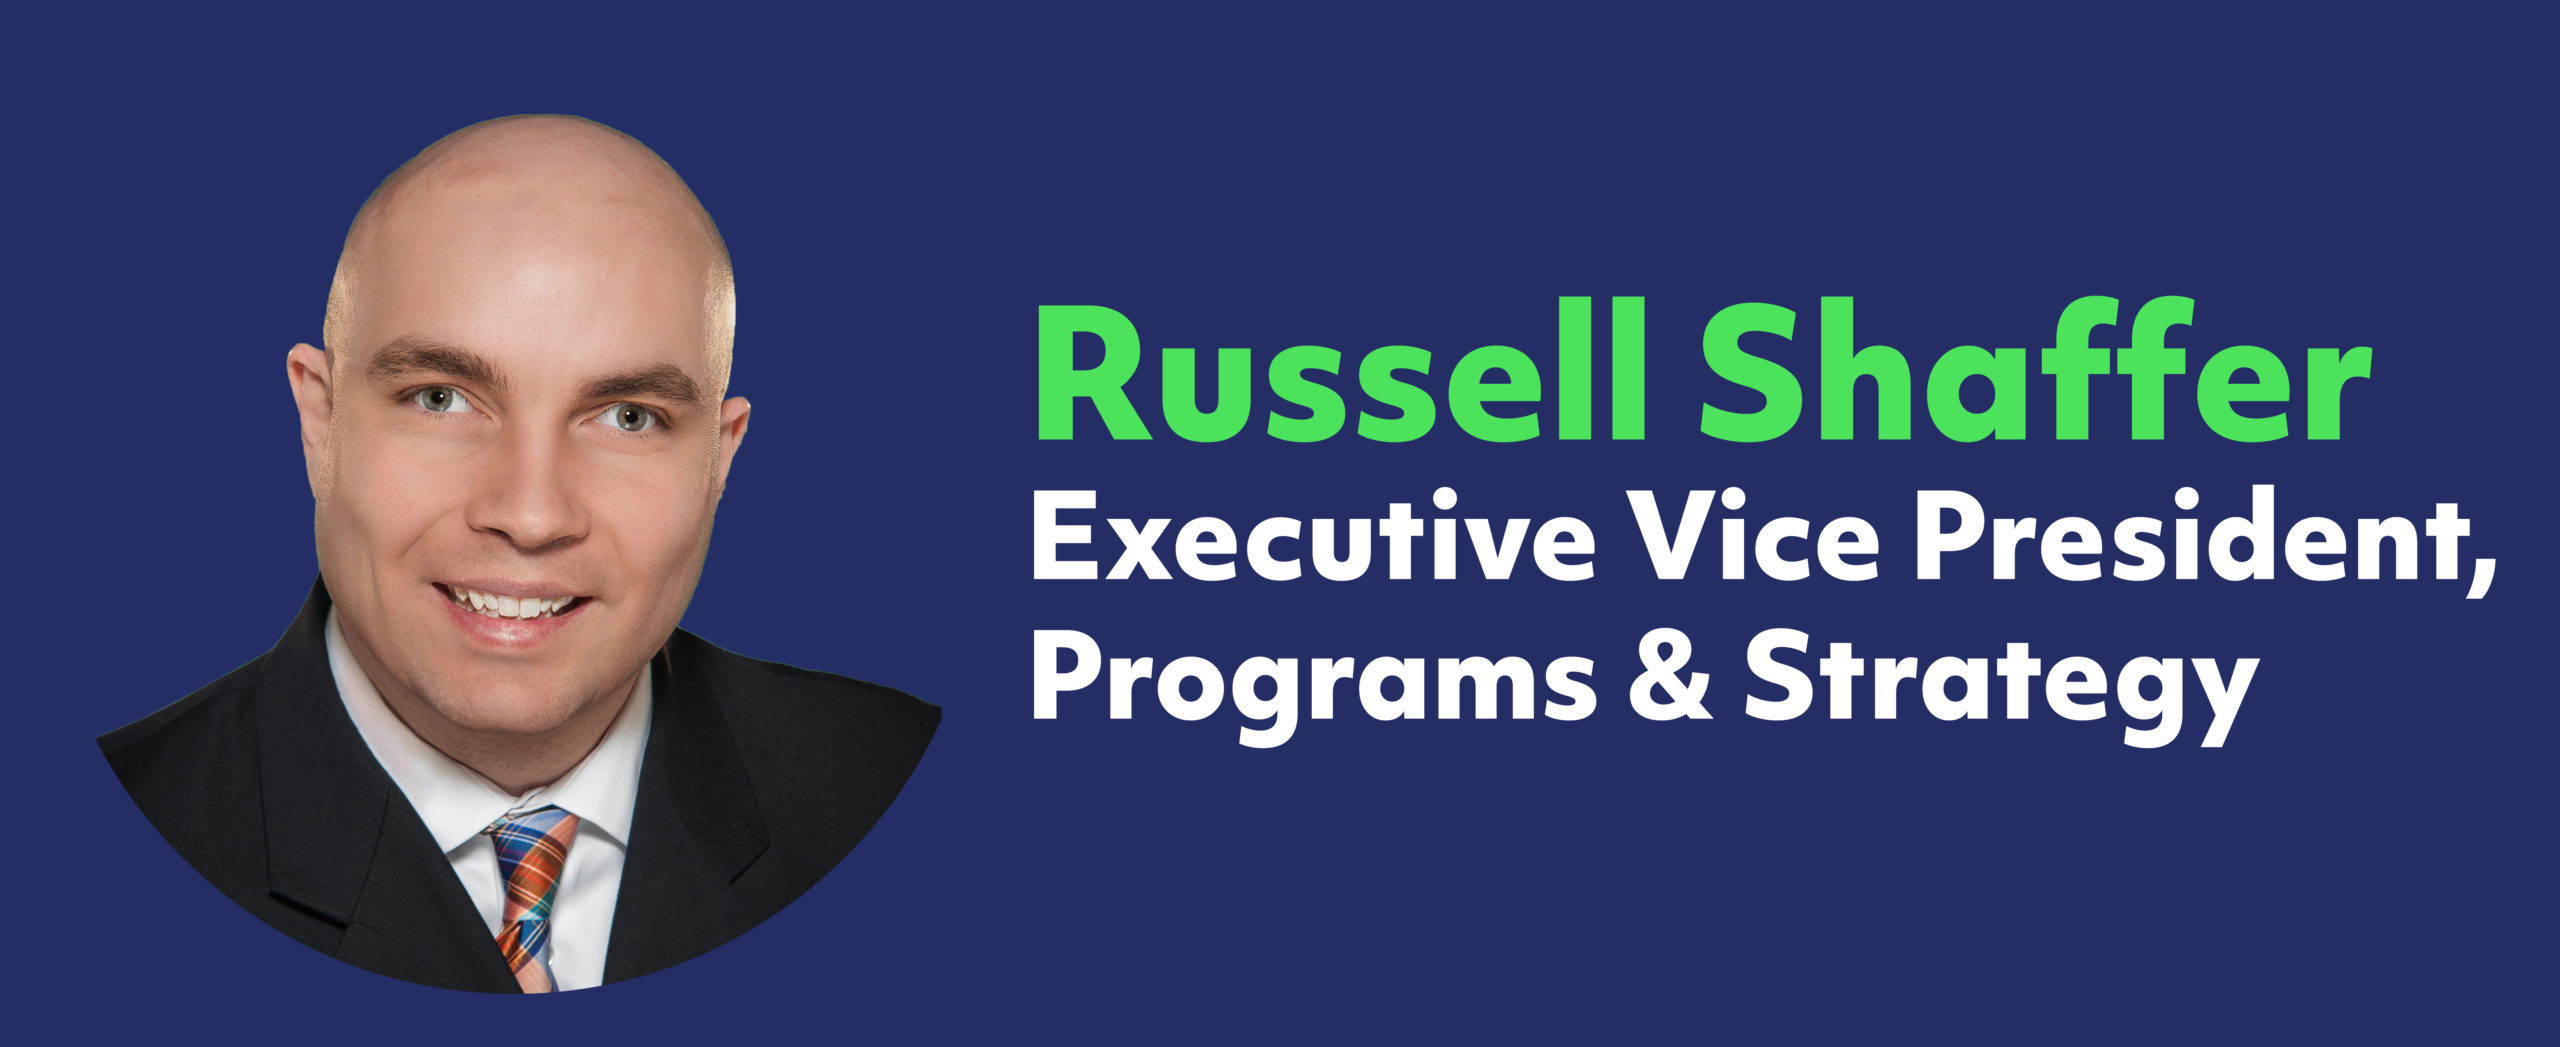 Russell Shaffer Joins Disability:IN as Executive Vice President, Programs & Strategy